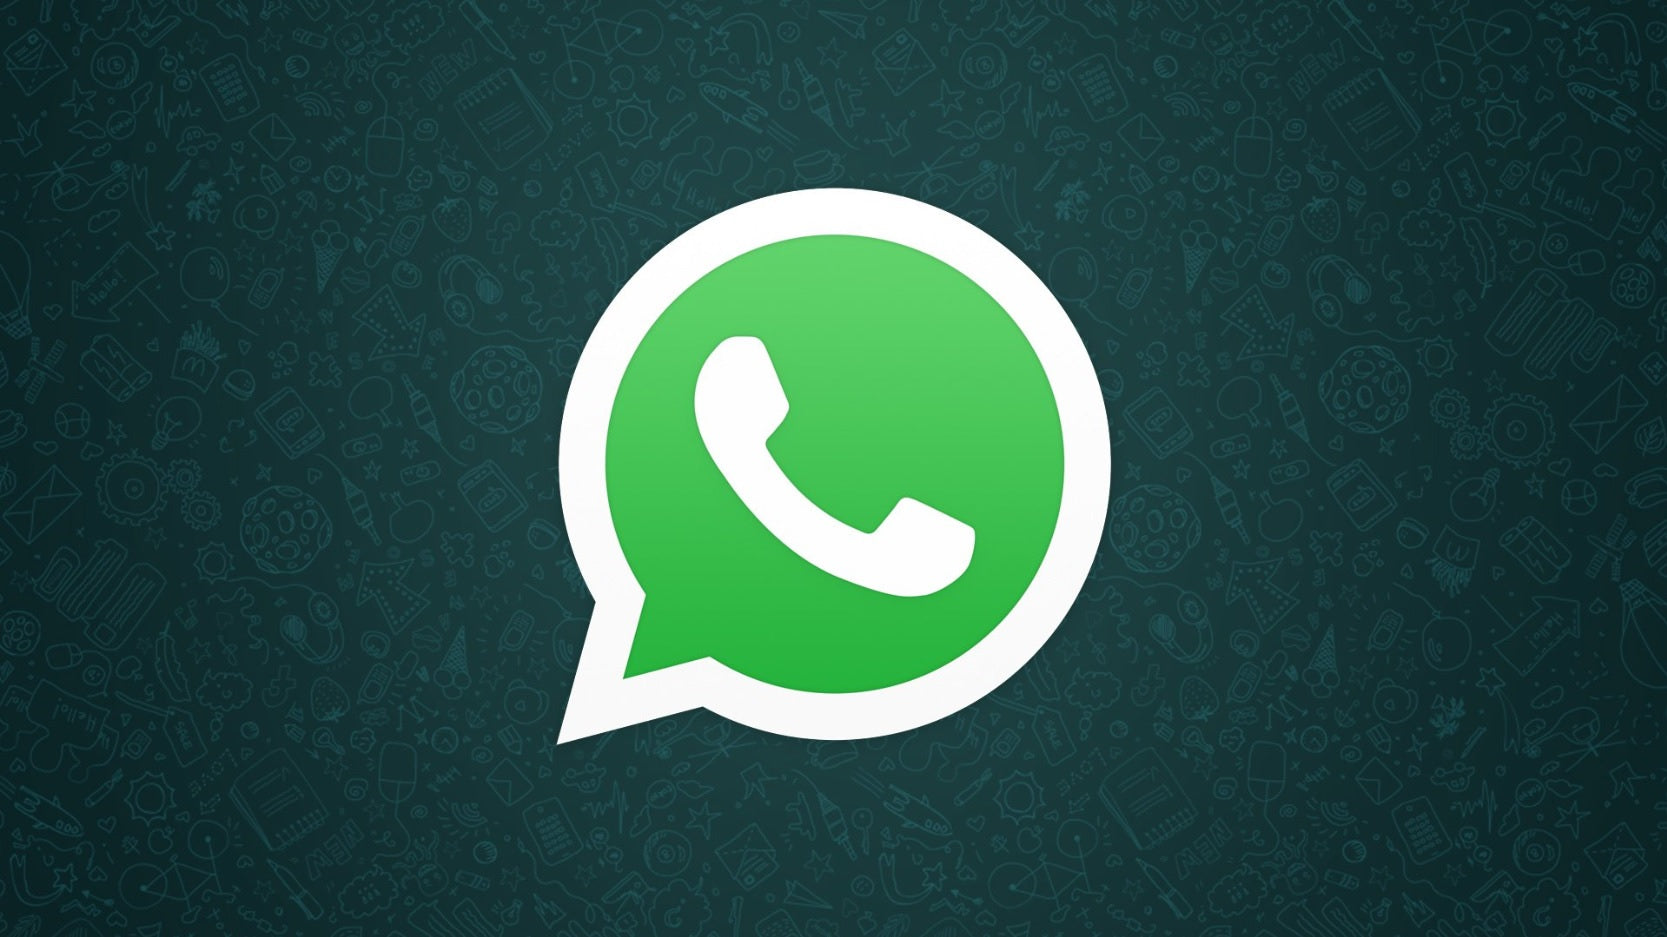 WhatsApp Introduces Group Voice Chats for 32 Participants in Latest Beta Update